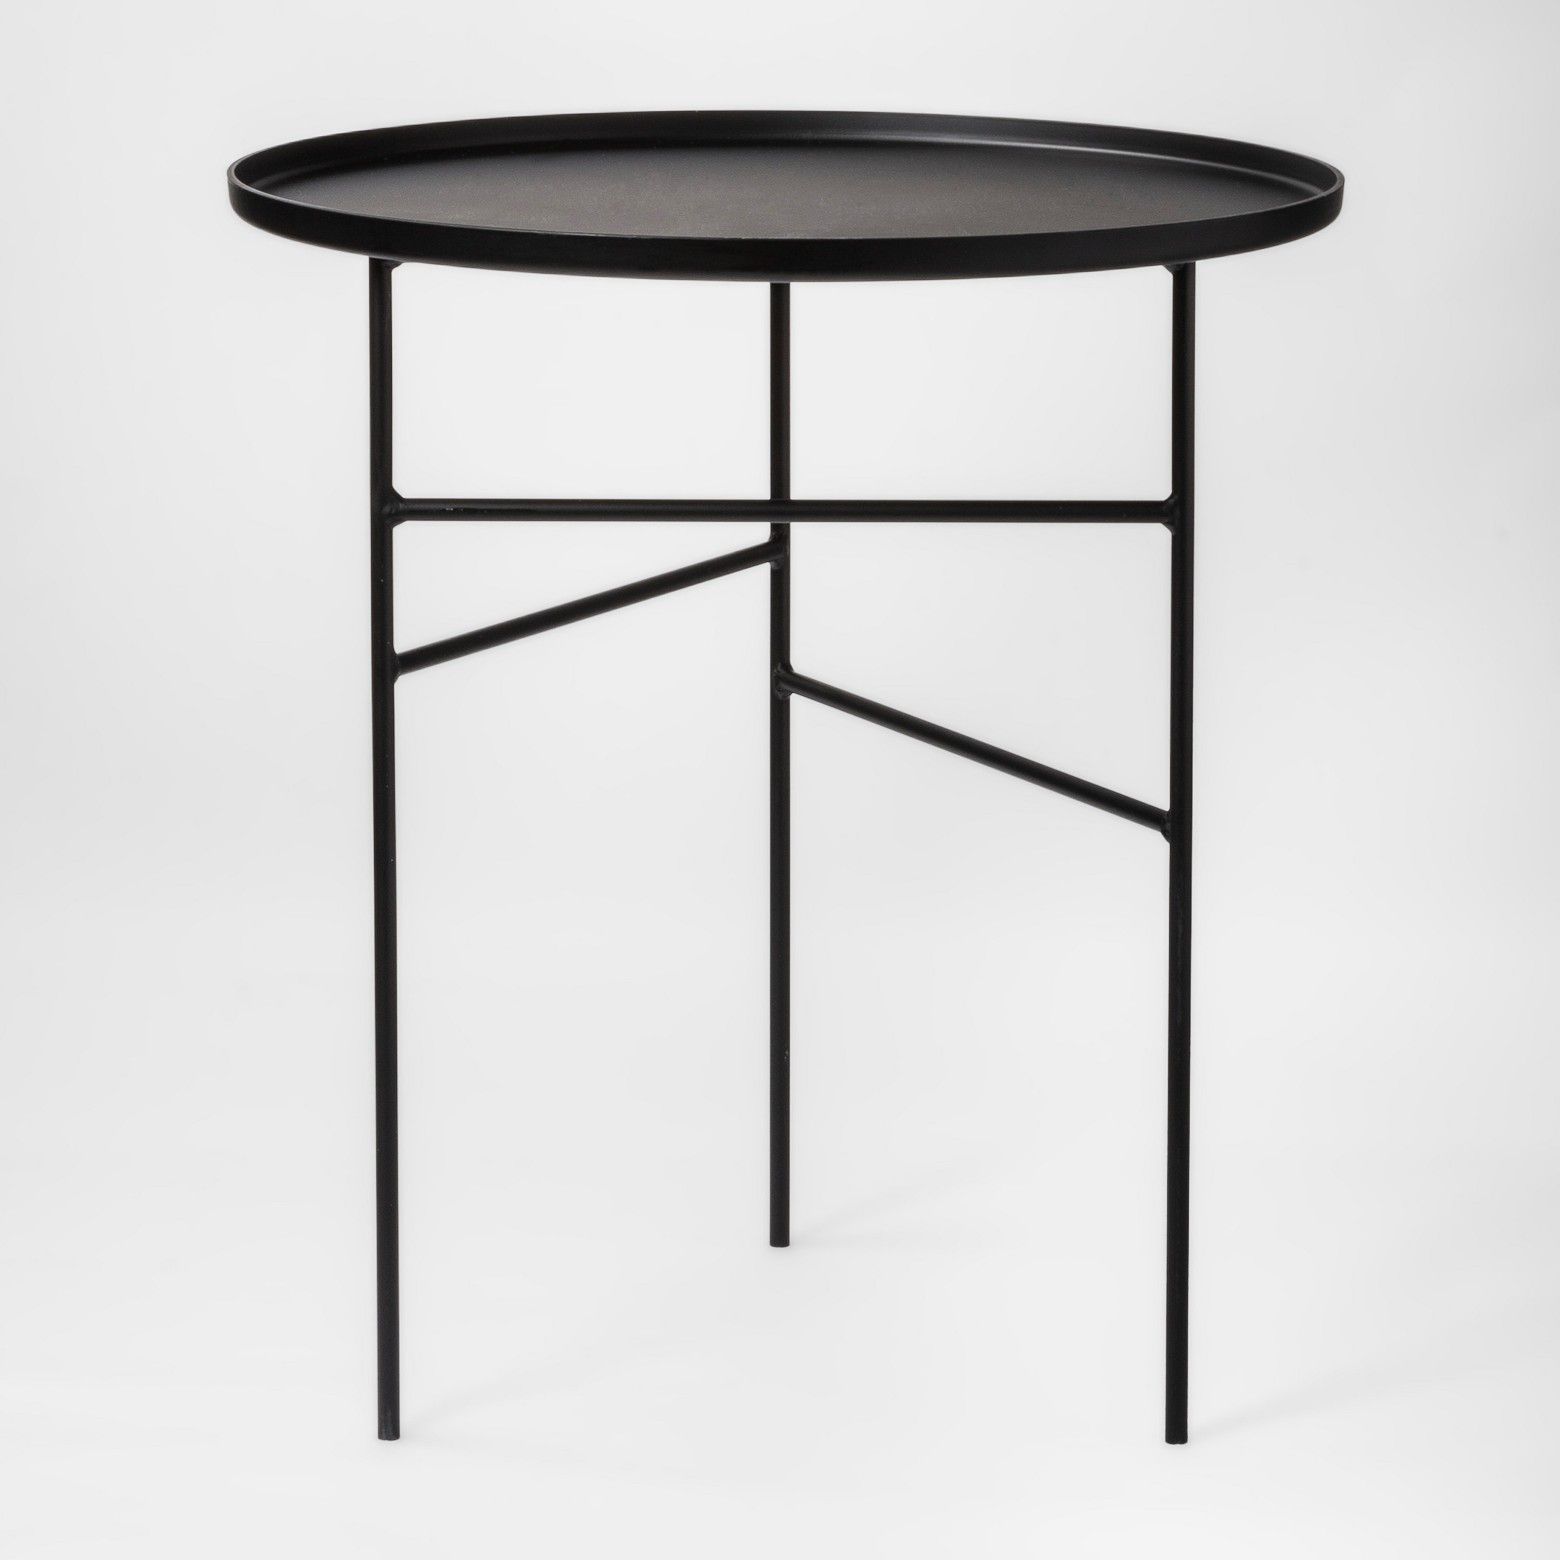 elgin accent table black project metal accents armchairs pier one furniture coupons narrow mirrored bedside lucite dining room outdoor umbrella stand weights cocktail tables ethan